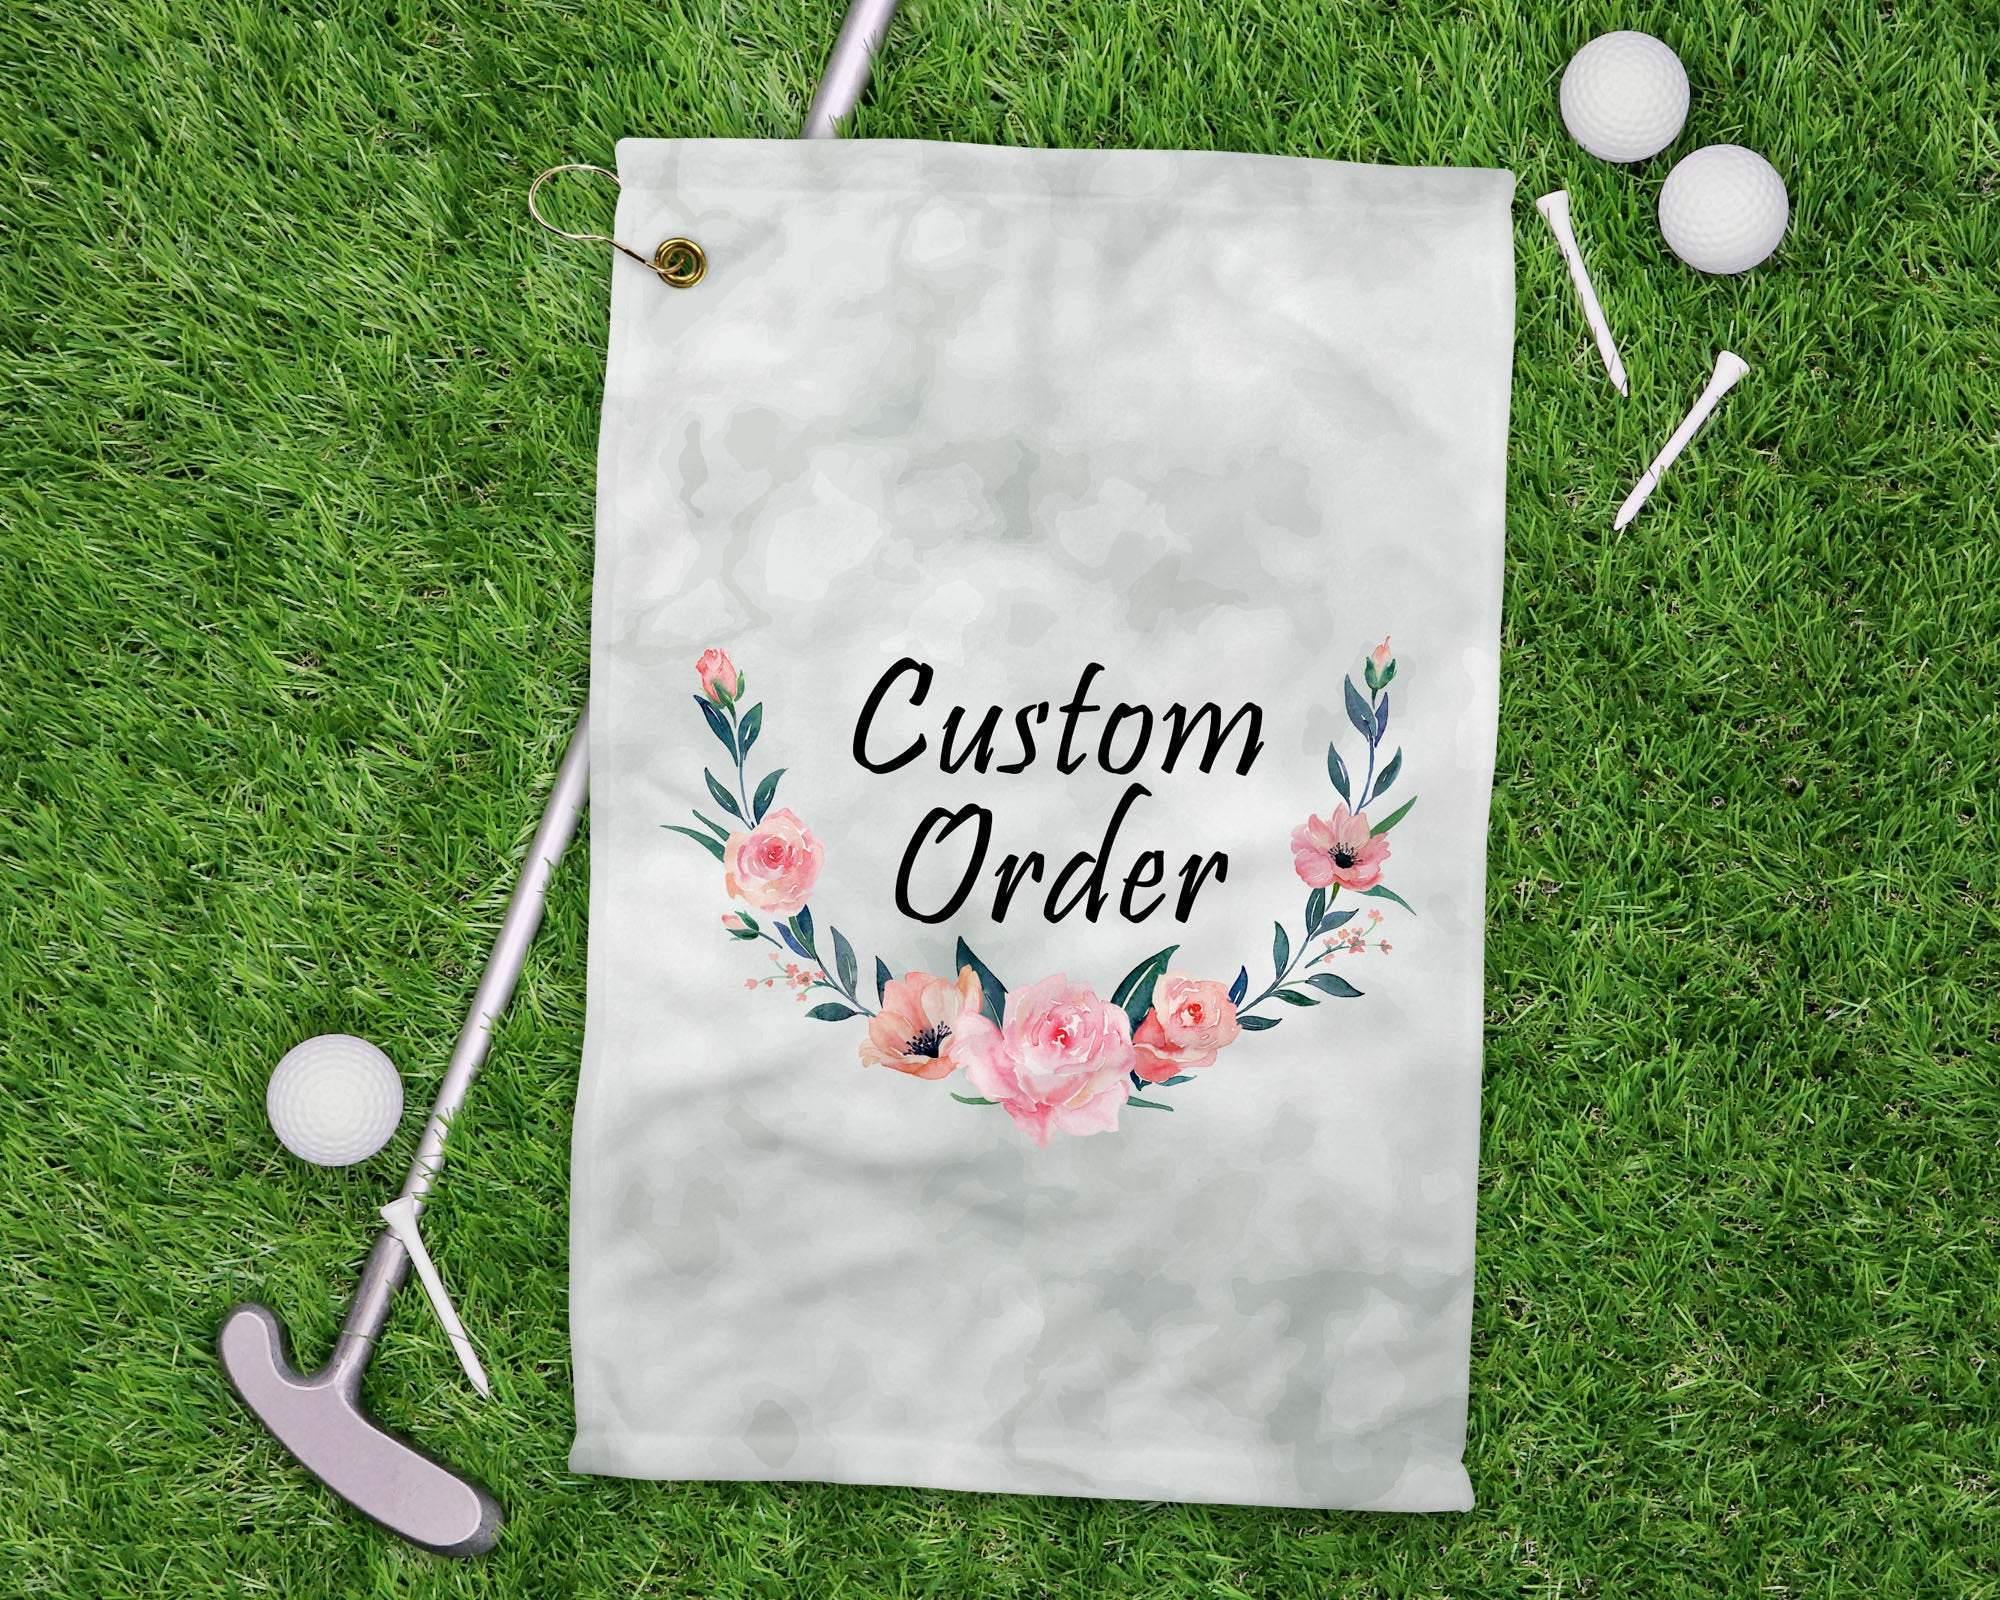 Personalized Golf Accessories | Custom Golf Towel | Custom Order - This & That Solutions - Personalized Golf Accessories | Custom Golf Towel | Custom Order - Personalized Gifts & Custom Home Decor